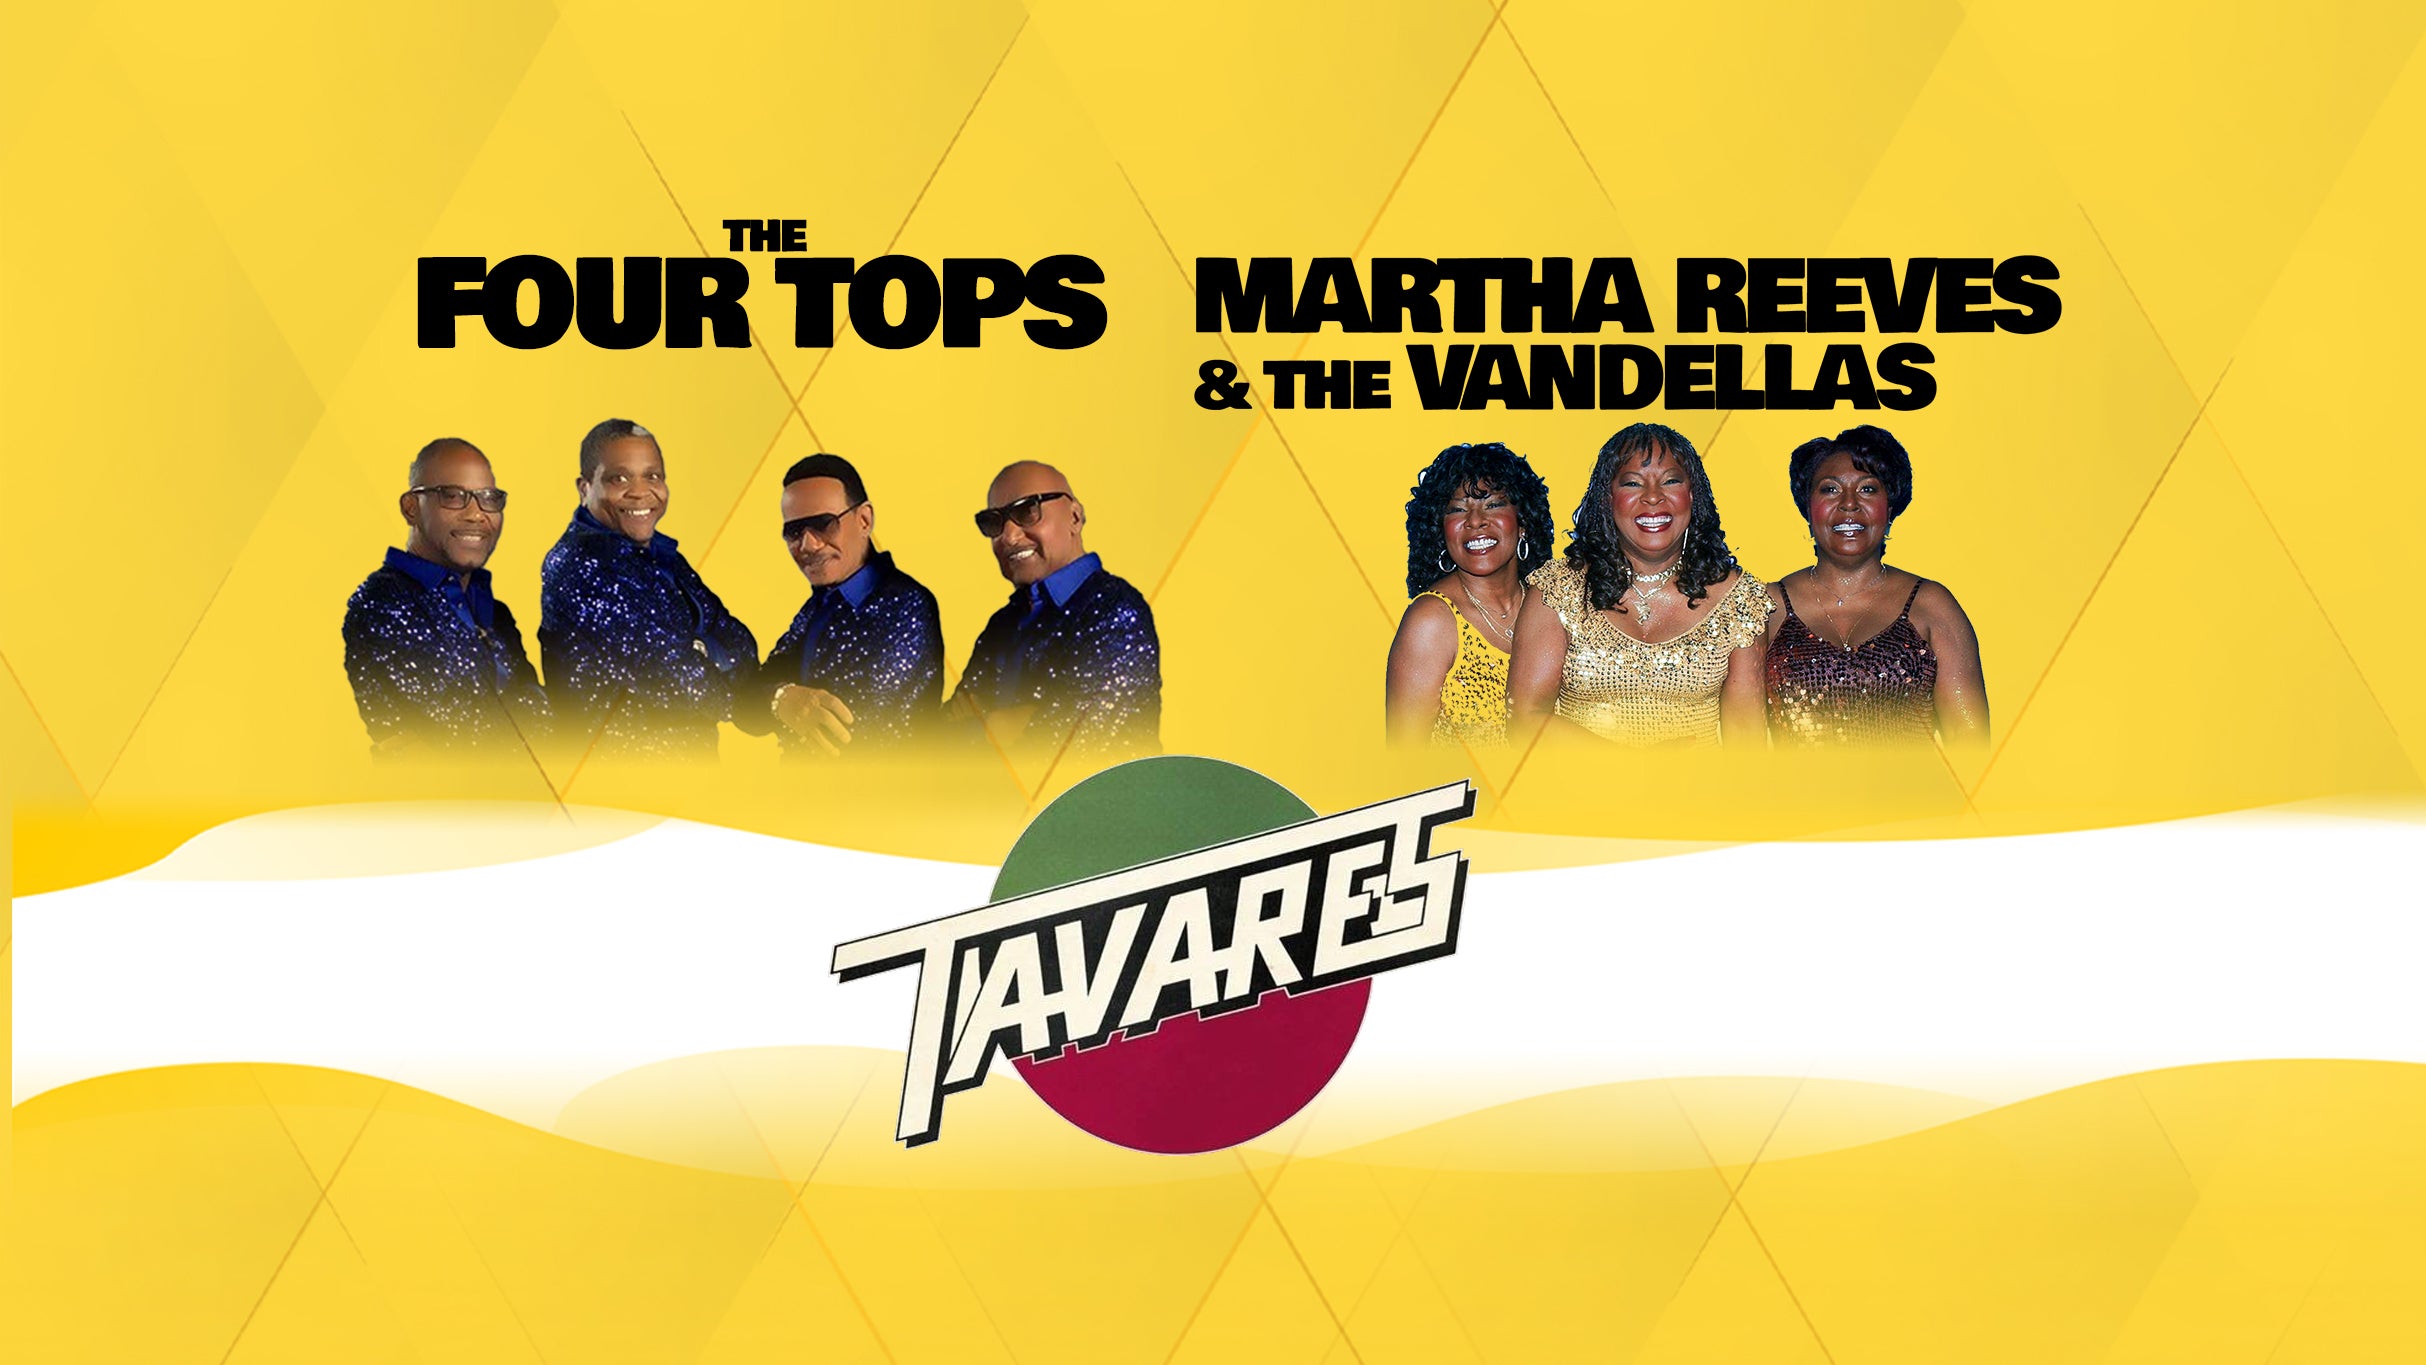 The Four Tops/ Tavares /Martha Reeves & the Vandellas pre-sale code for musical tickets in Liverpool,  (M&S Bank Arena Liverpool)